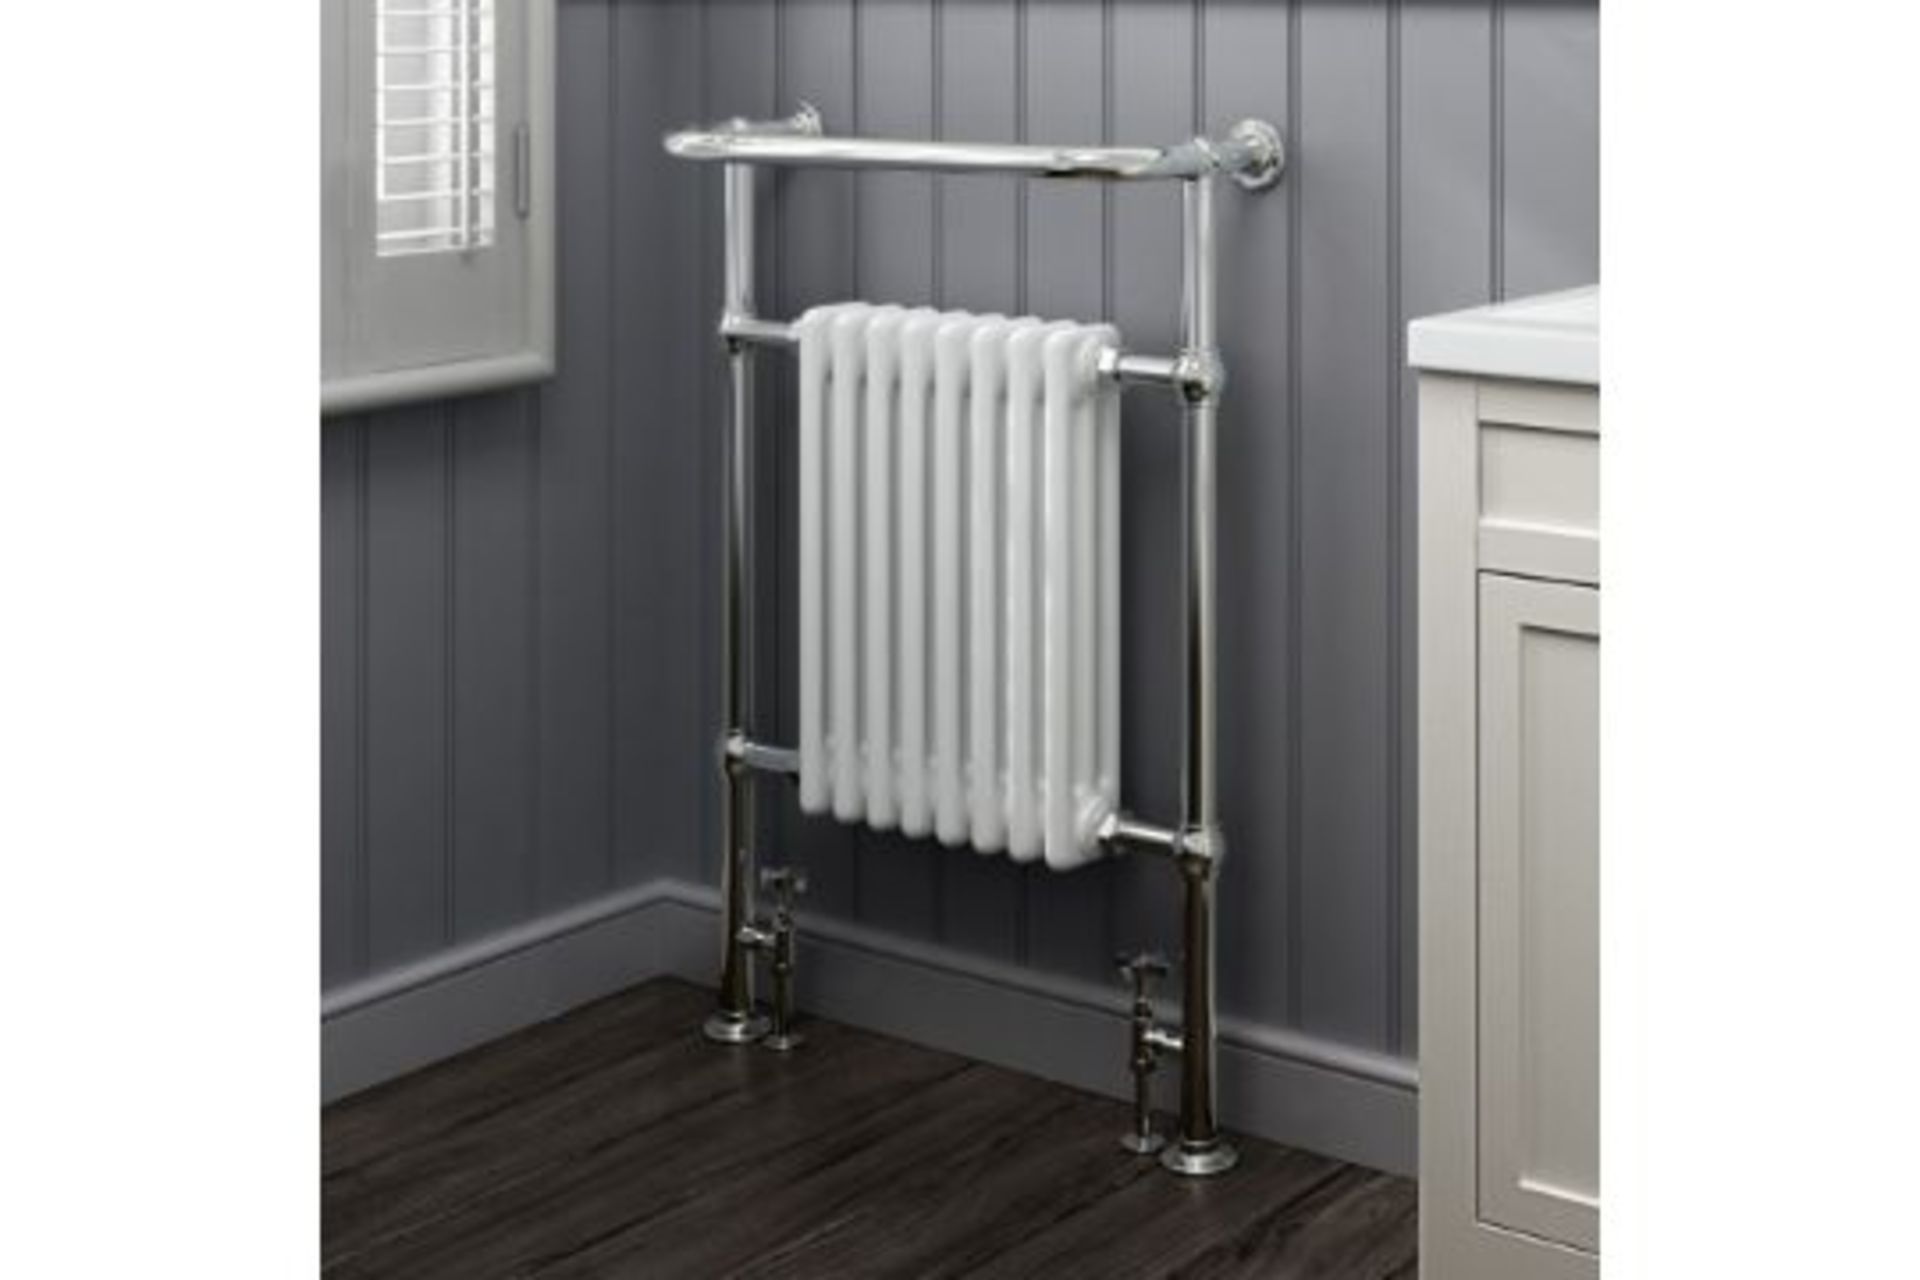 BRAND NEW BOXED 952x659mm Large Traditional White Premium Towel Rail Radiator.RRP £499.99.We l...